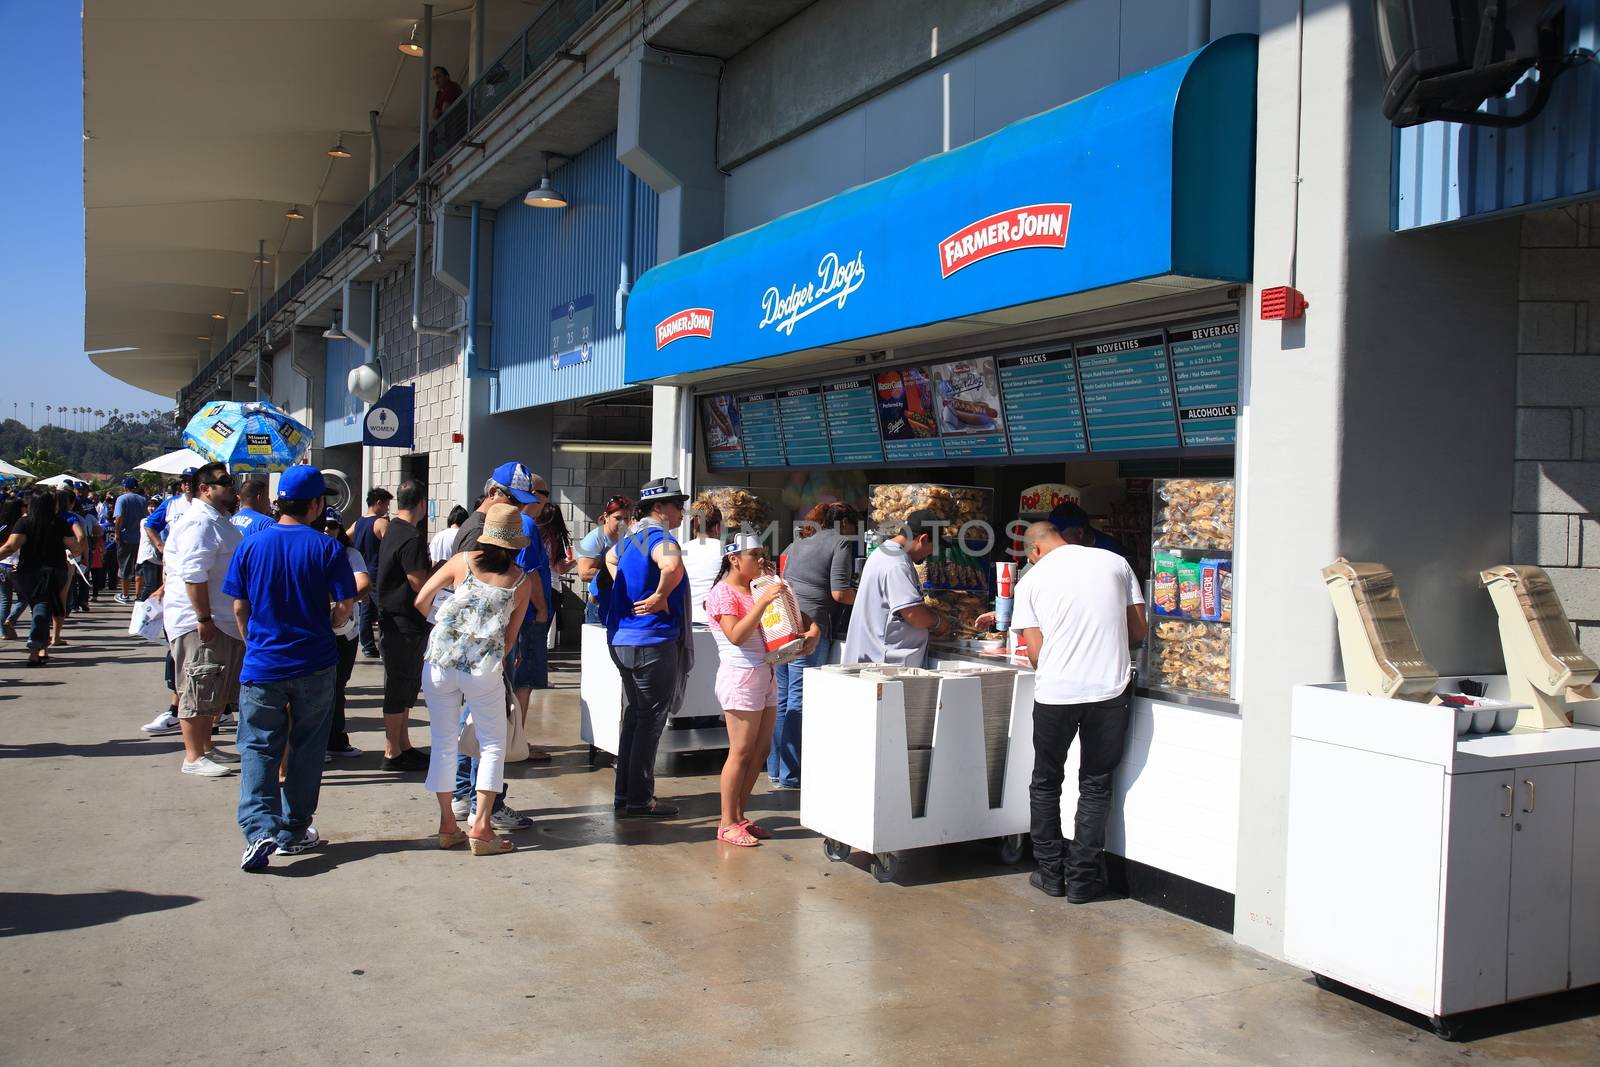 Dodger Stadium concession stand during a Dodgers baseball game.